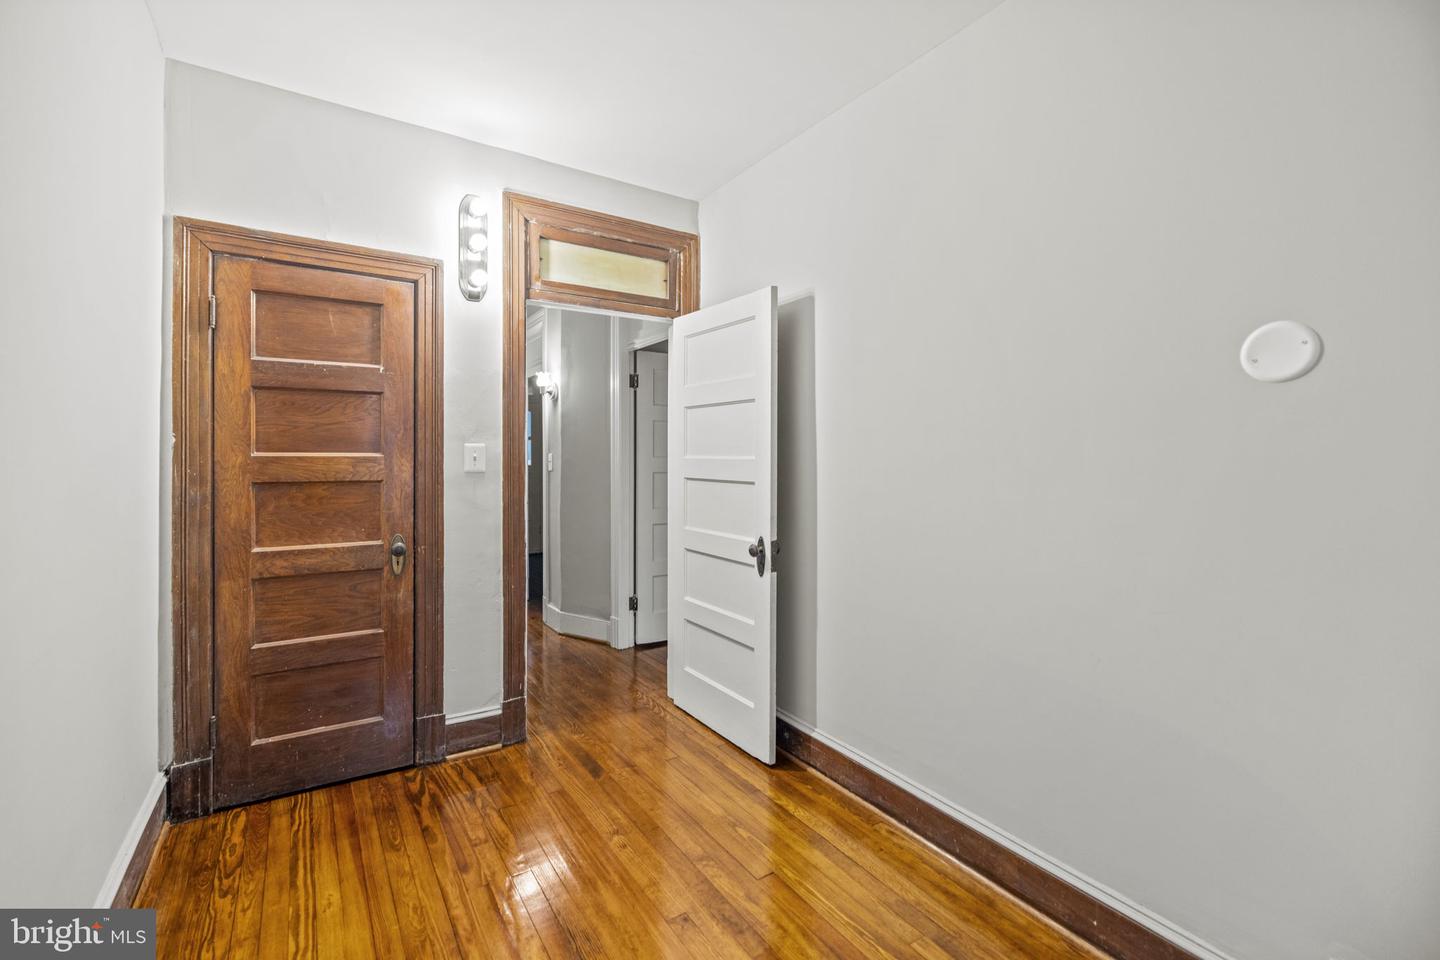 30 W Street NW, Washington, District Of Columbia, 20001, United States, 3 Bedrooms Bedrooms, ,2 BathroomsBathrooms,Residential,For Sale,30 W Street NW,1498717